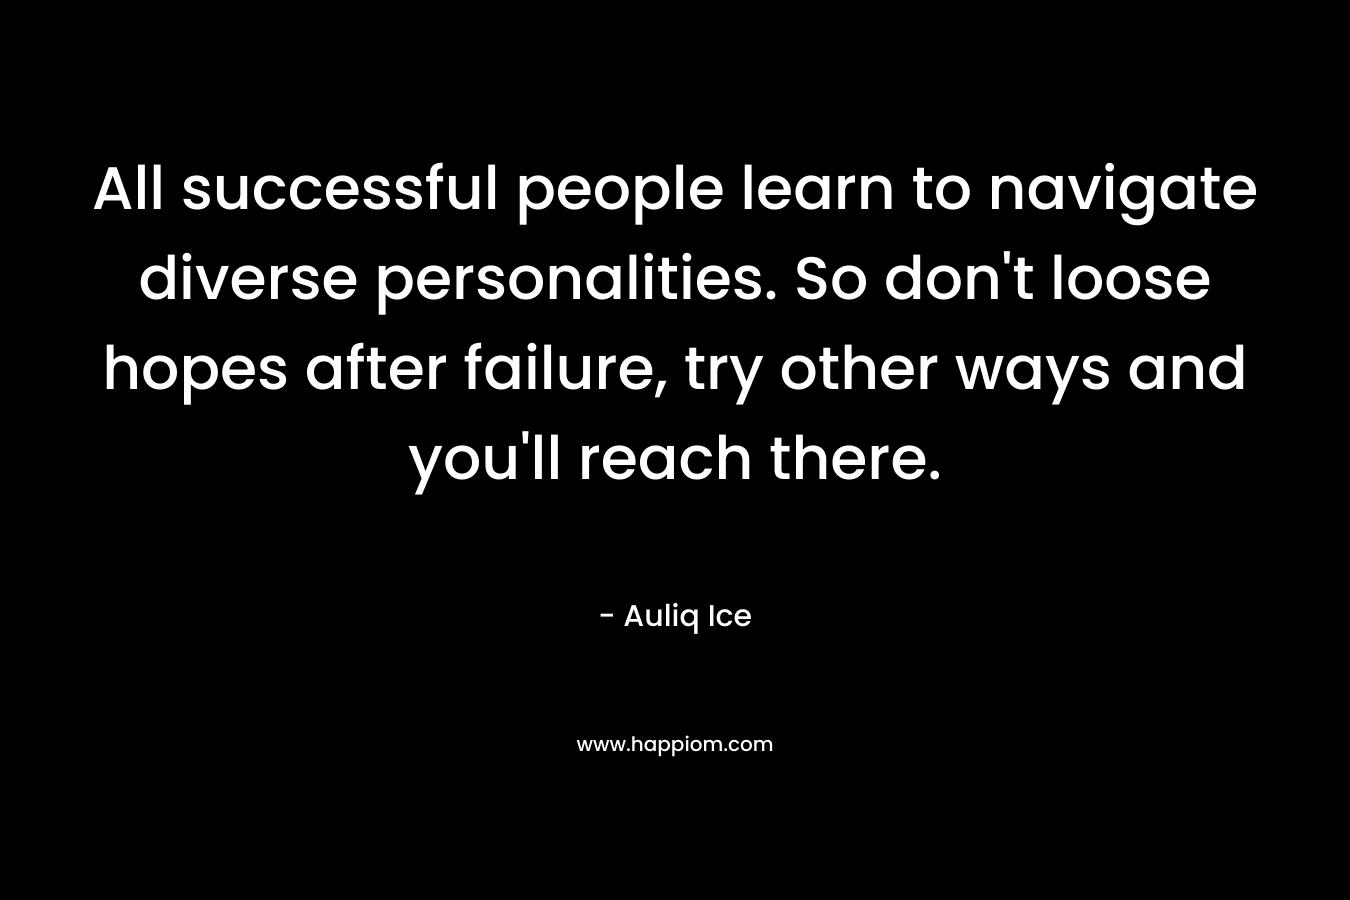 All successful people learn to navigate diverse personalities. So don’t loose hopes after failure, try other ways and you’ll reach there. – Auliq Ice